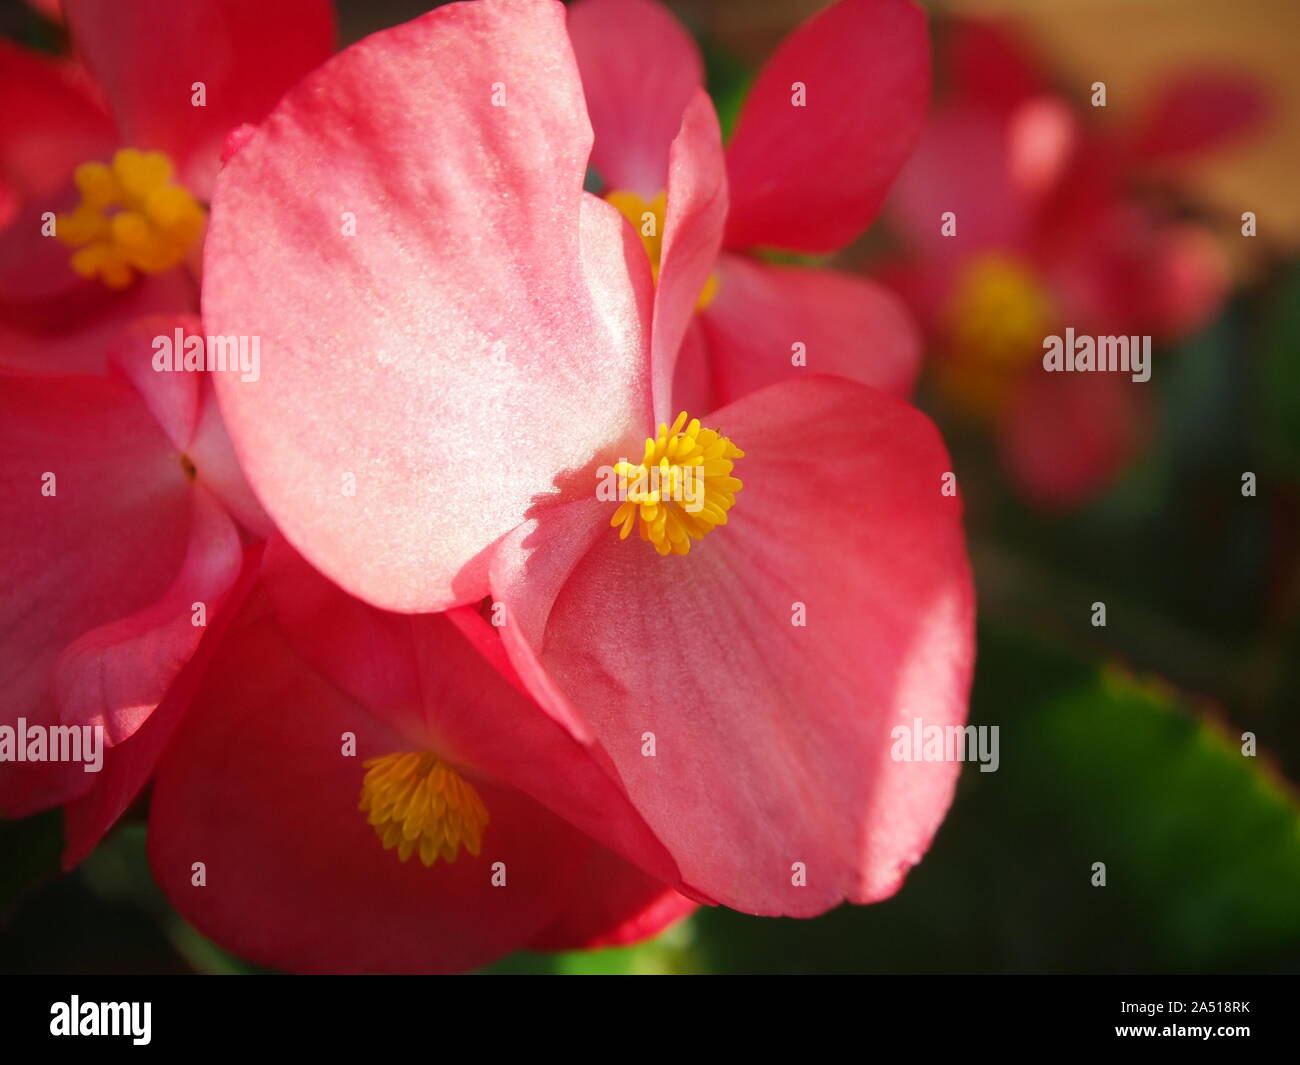 Pink begonia flower with yellow stamens, leaves in the background Stock Photo